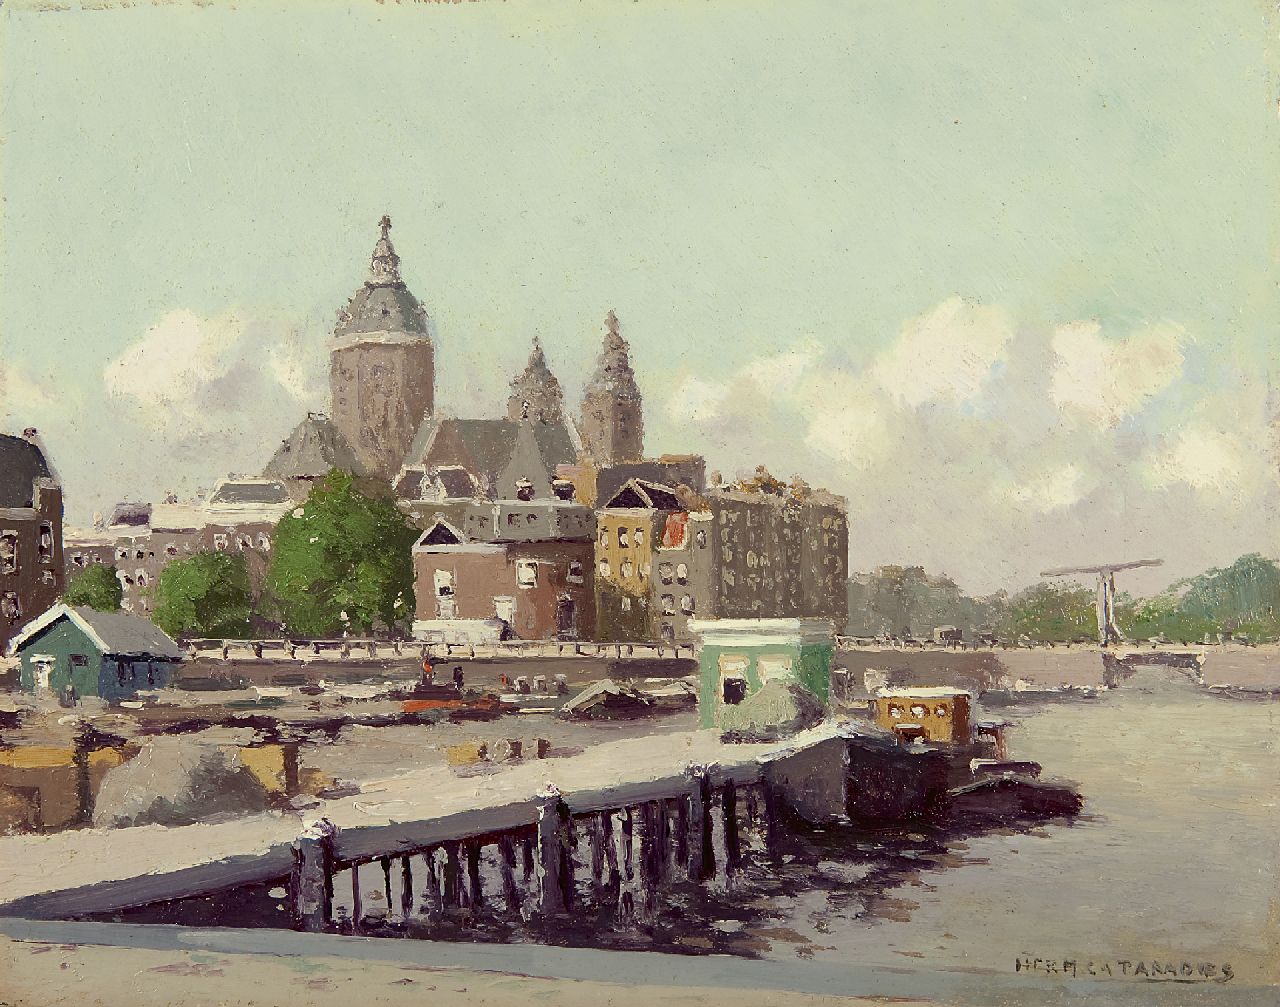 Paradies H.C.A.  | Herman Cornelis Adolf Paradies, The Oosterdok in Amsterdam with the Schreierstoren and St. Nicolaaskerk, oil on painter's board 23.6 x 29.7 cm, signed l.r.